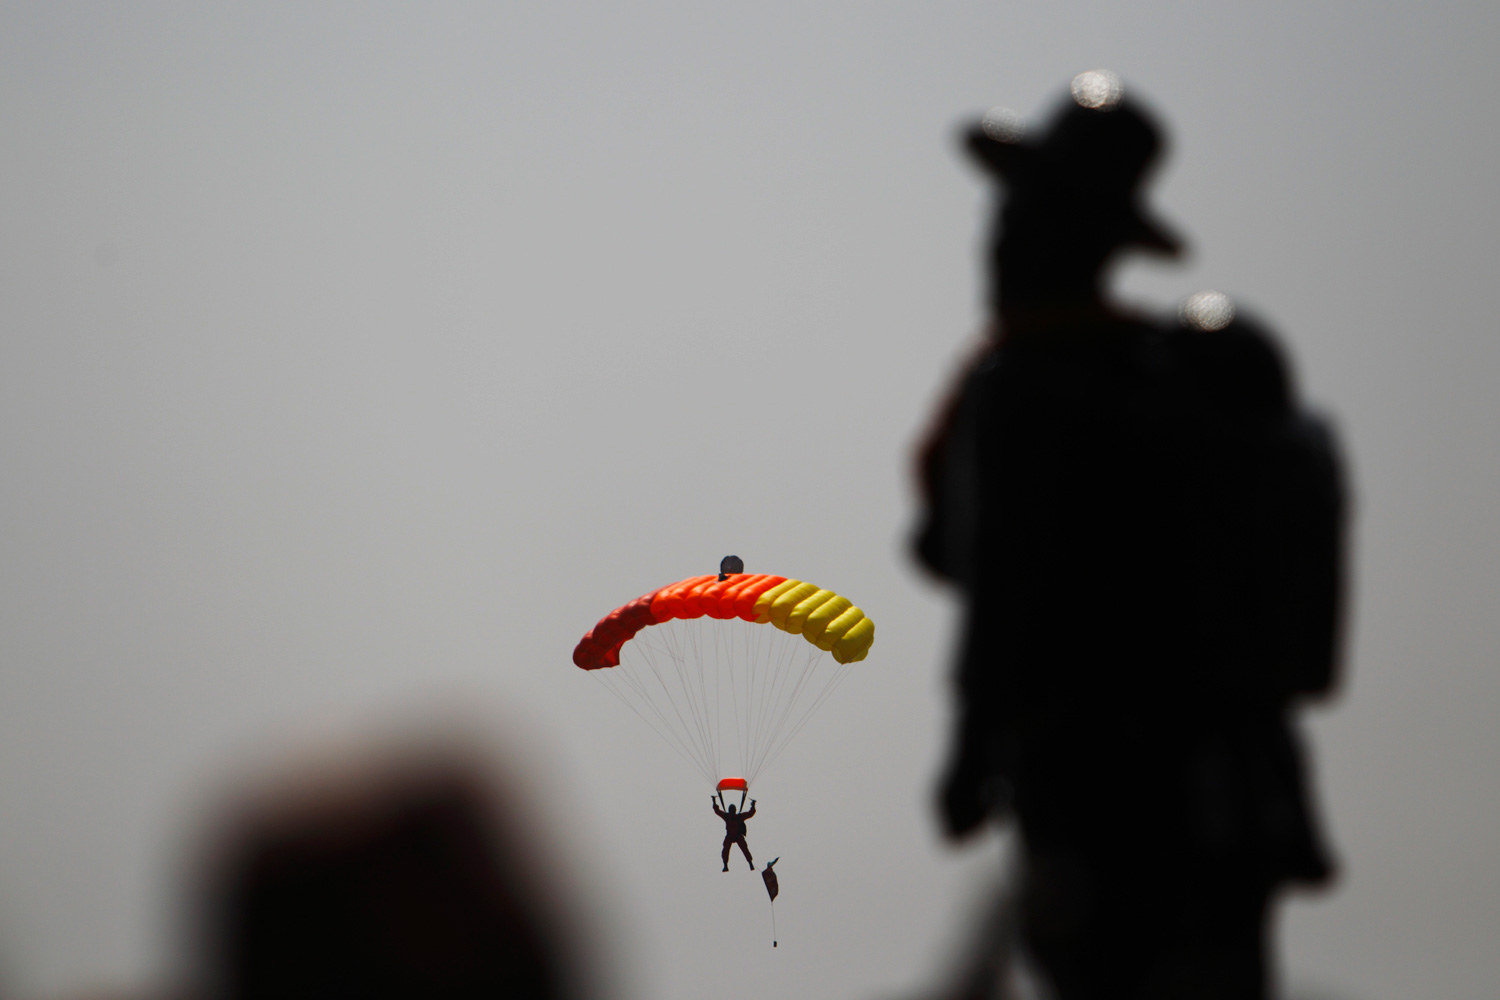 Feb. 20, 2012. A member of the Nepalese army on a parachute demonstrates his skills during the Army Day celebration in Kathmandu.